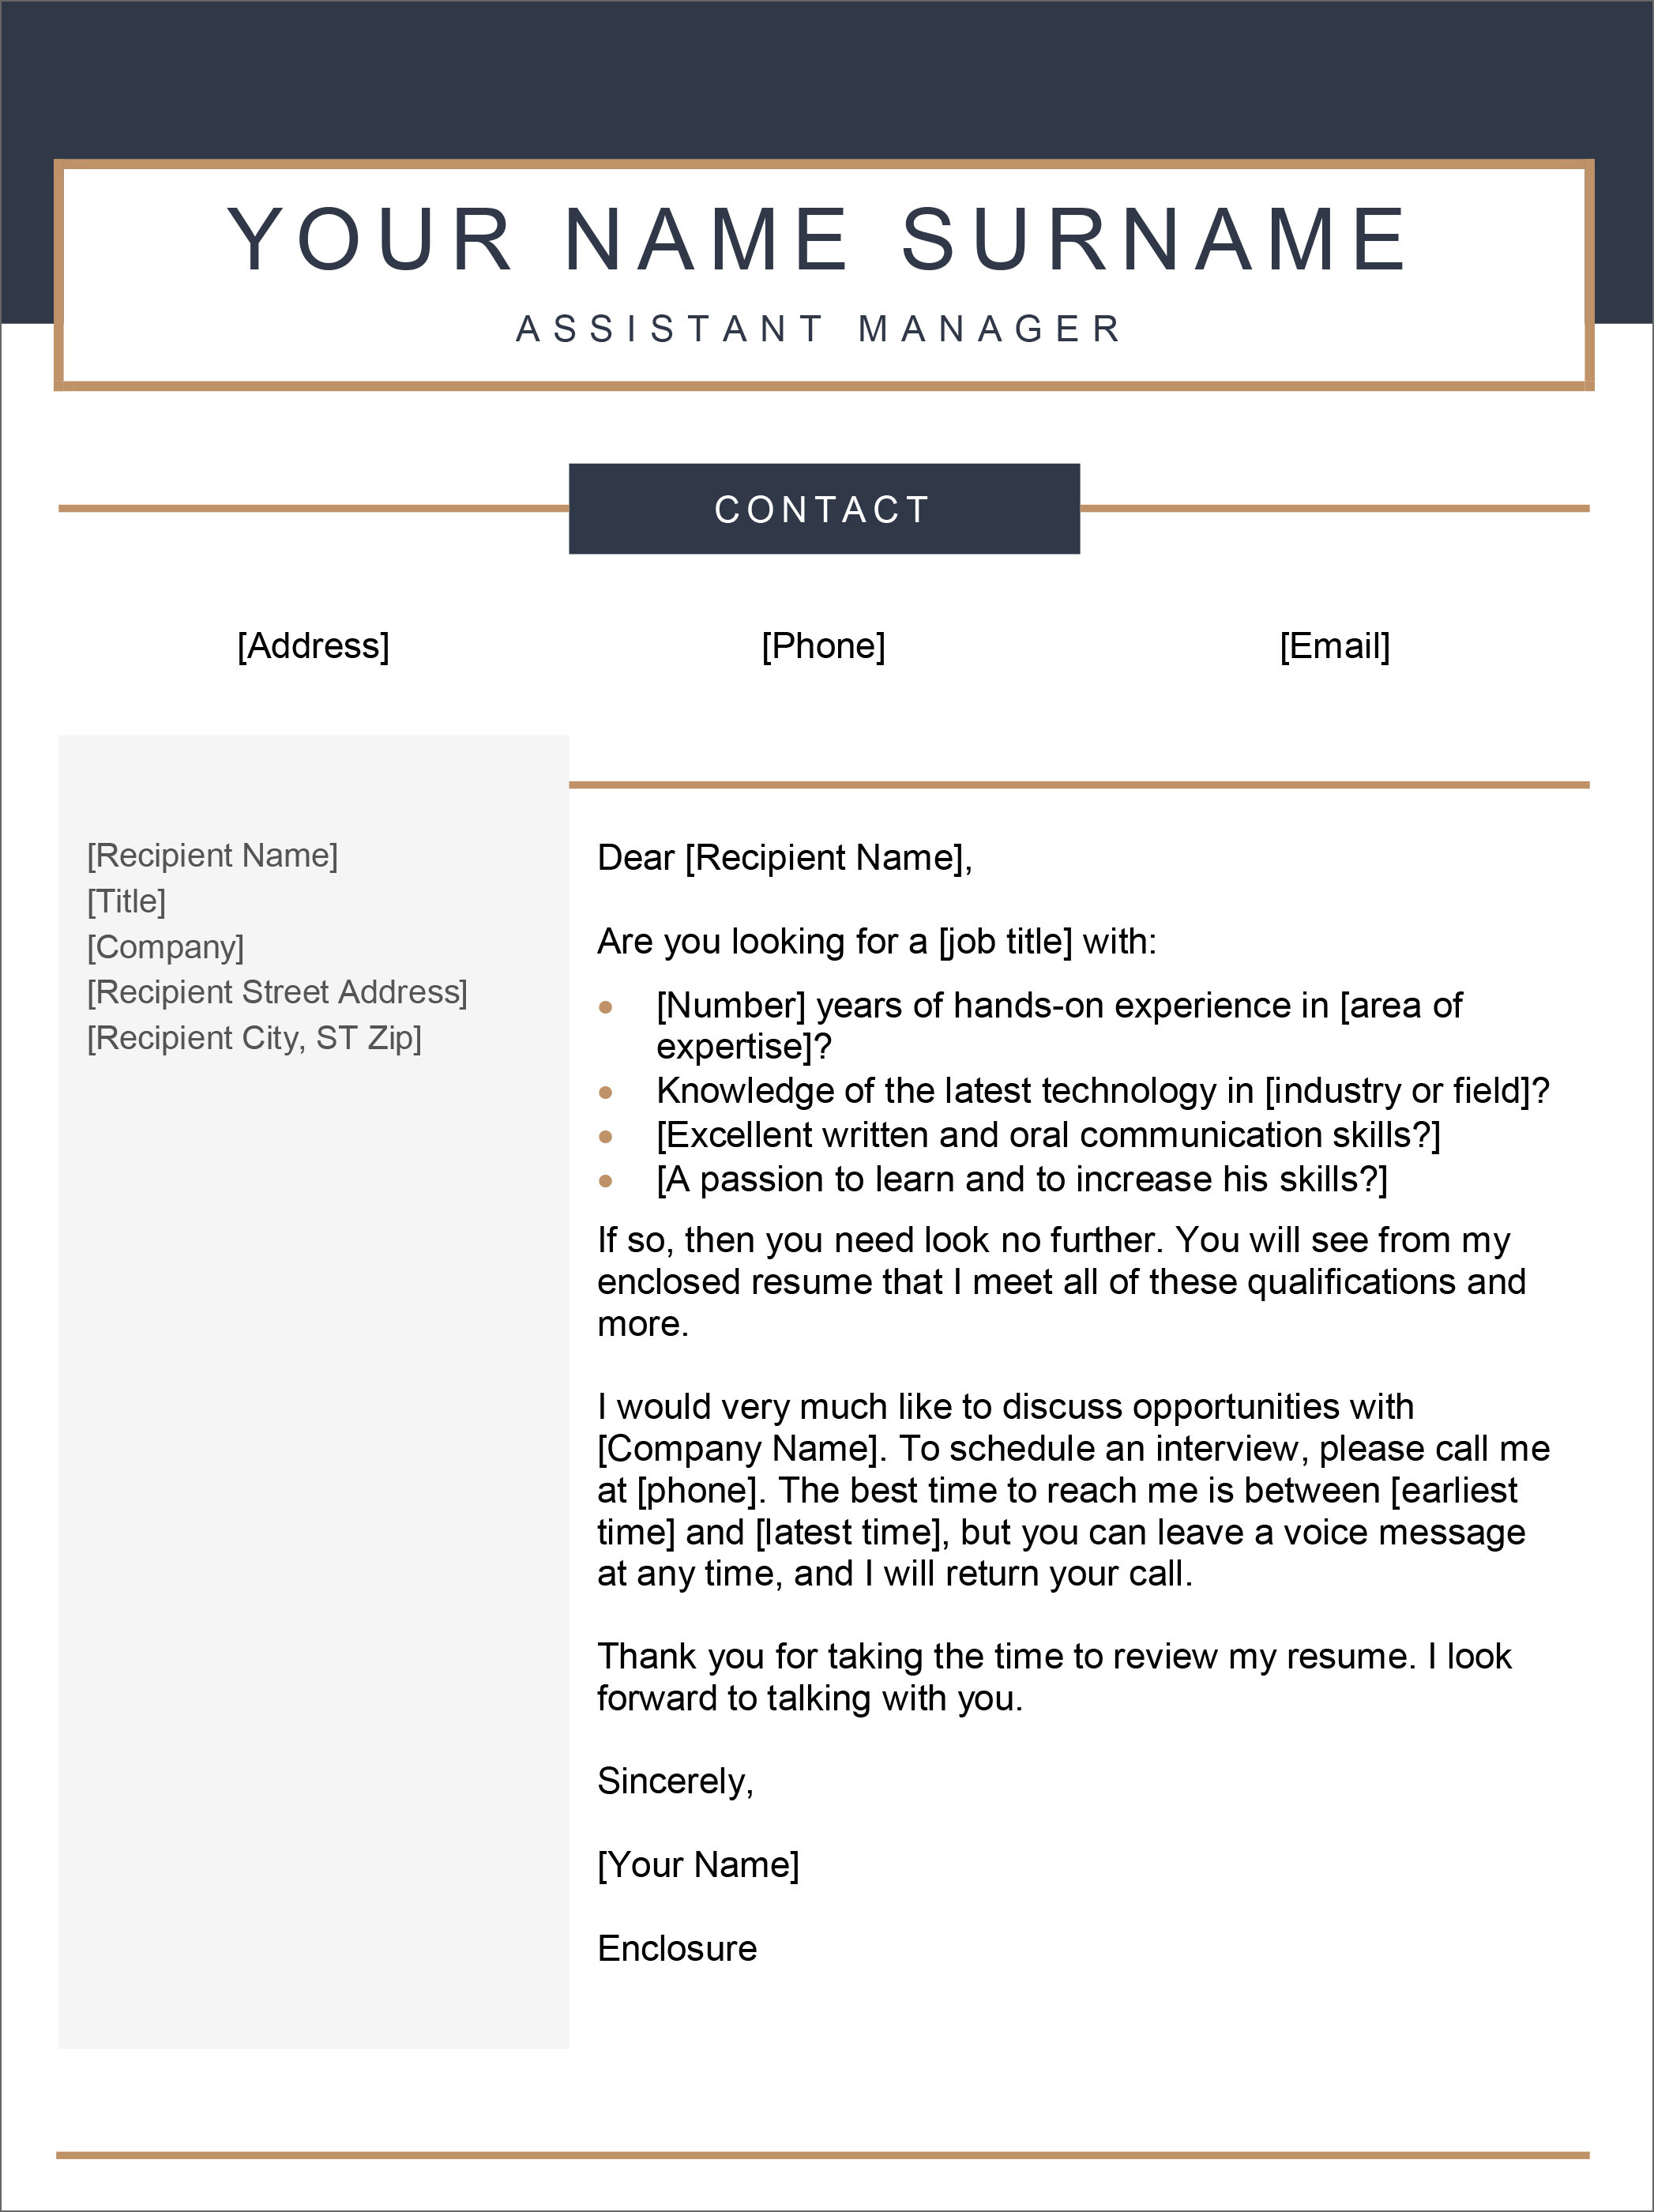 cv cover letter word template